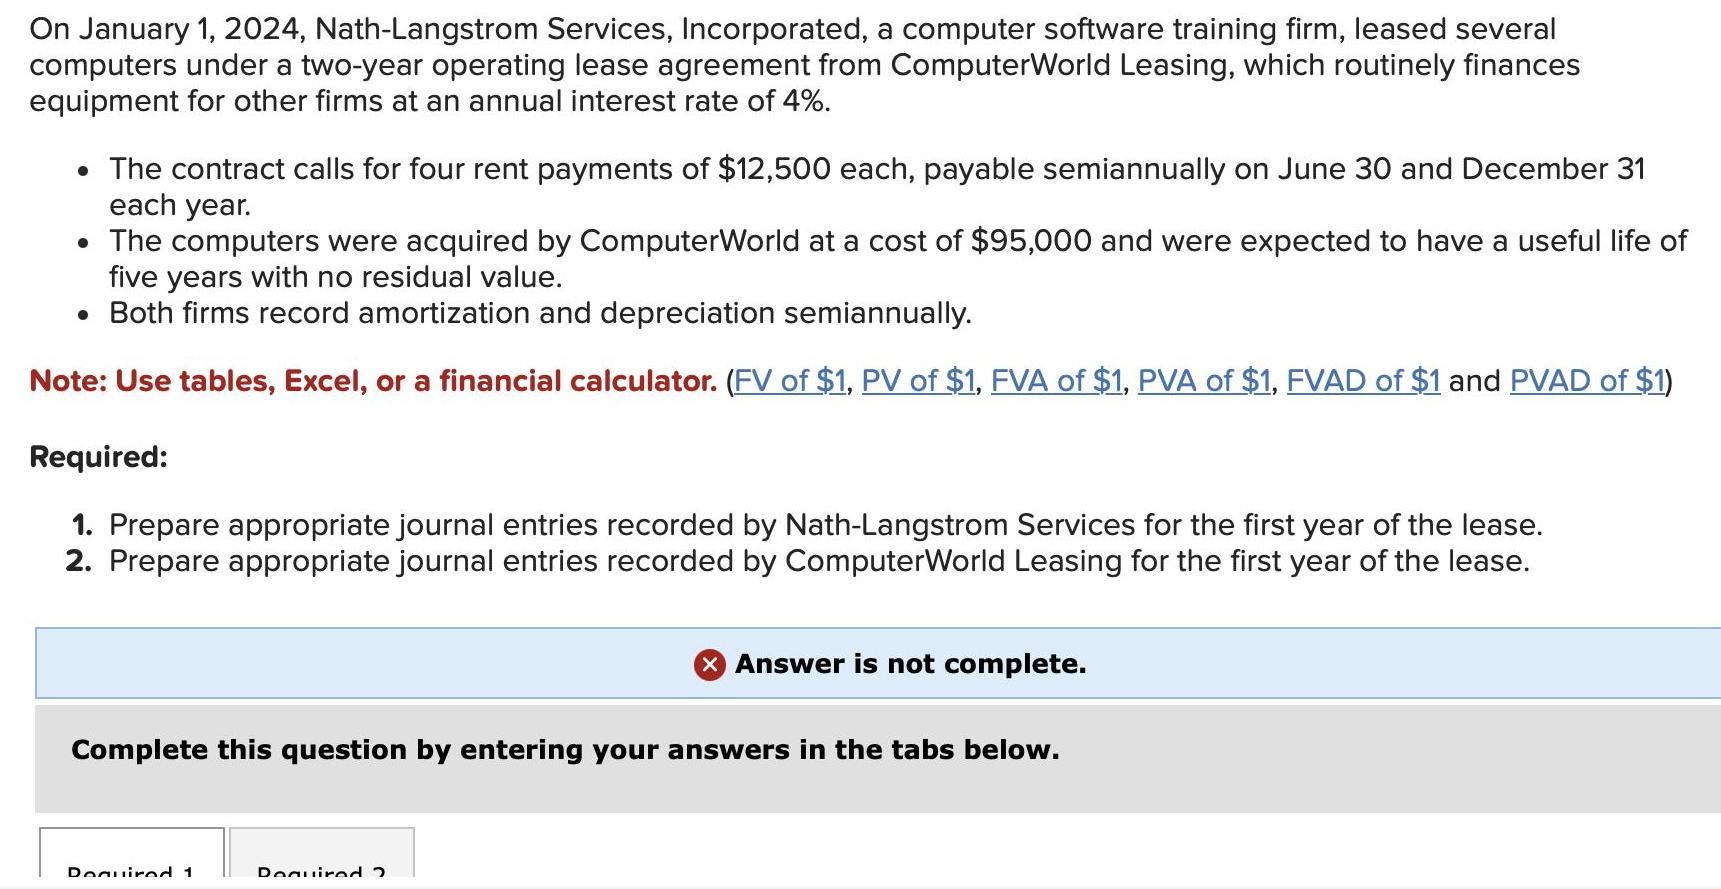 On January 1, 2024, Nath-Langstrom Services, Incorporated, a computer software training firm, leased several